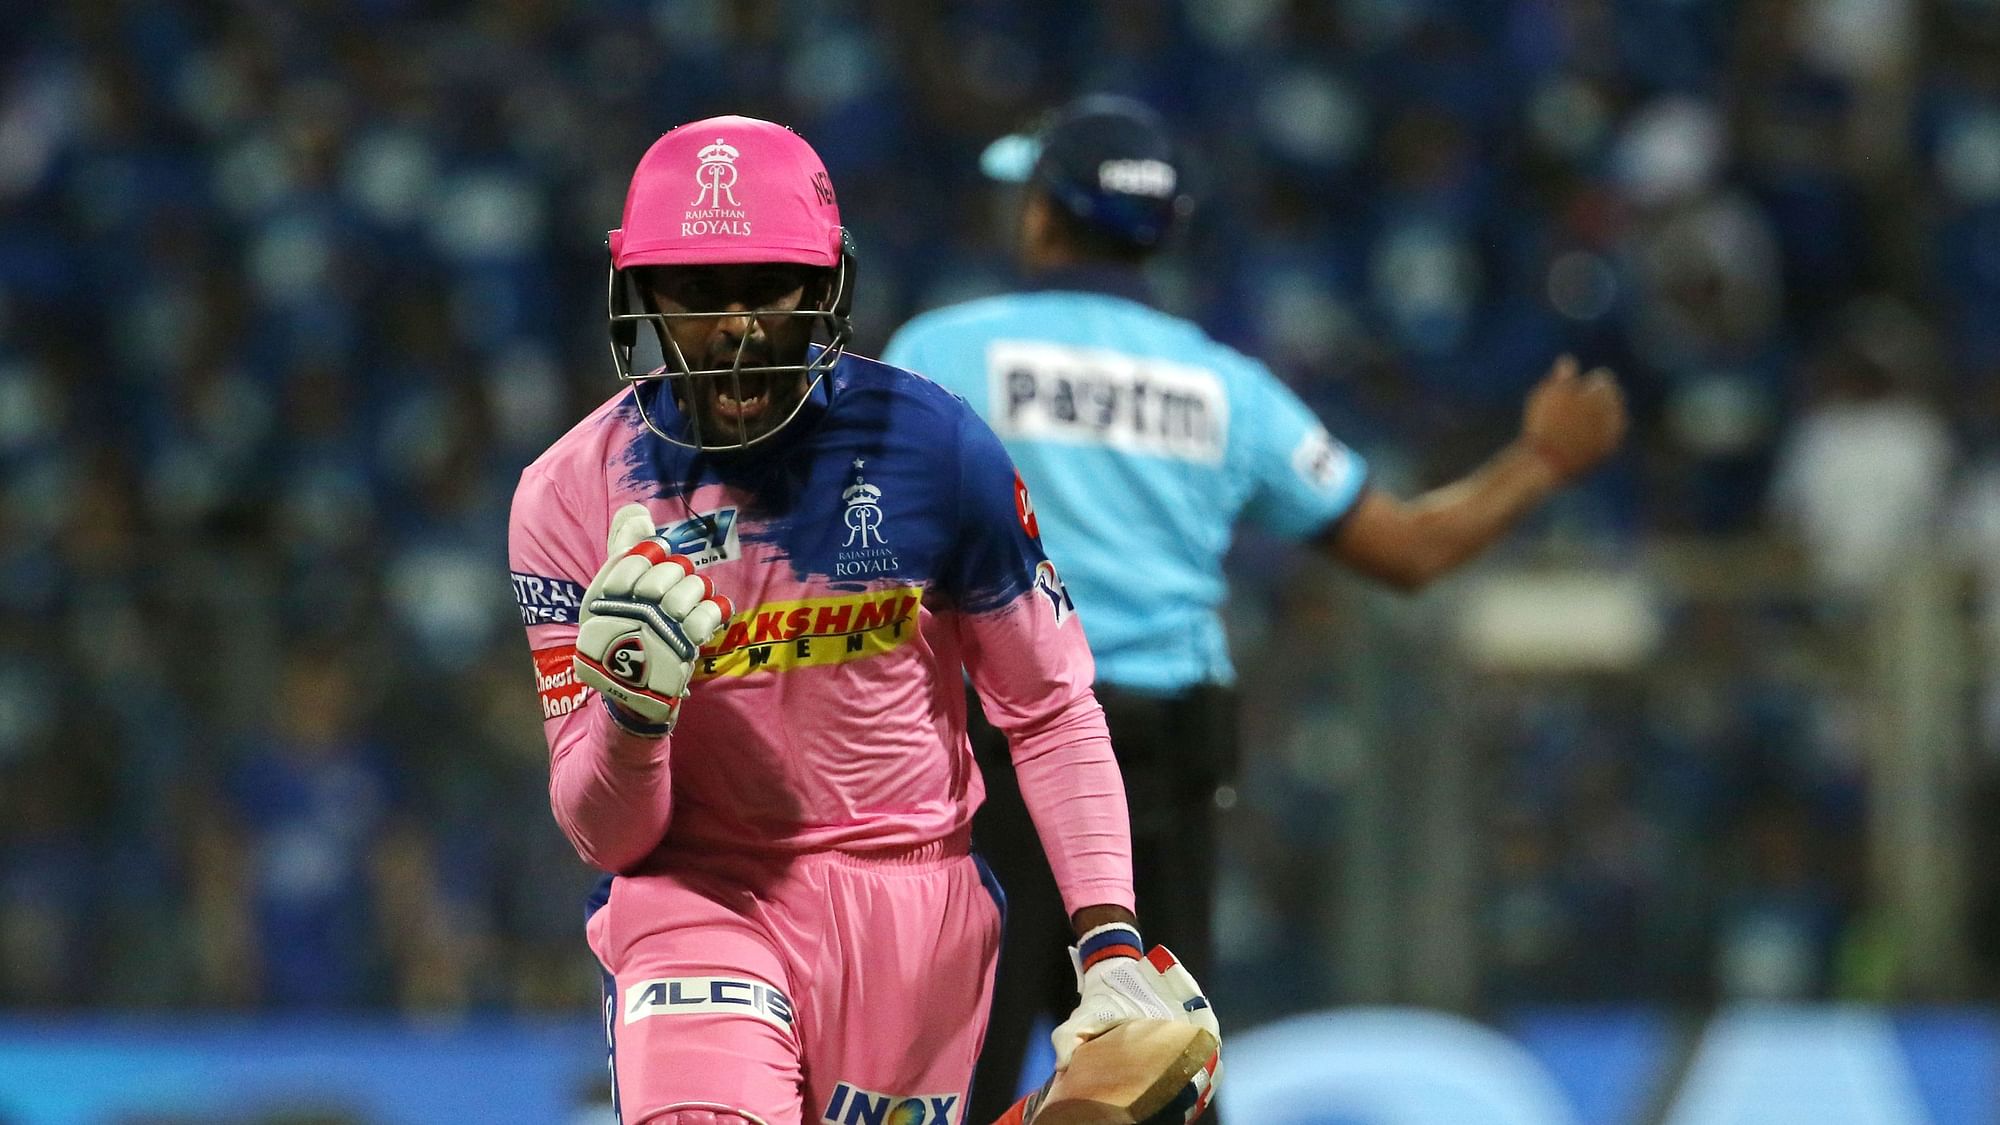 Shreyas Gopal scored a 7-ball 13 and helped Rajasthan Royals win by 4 wickets against Mumbai Indians.